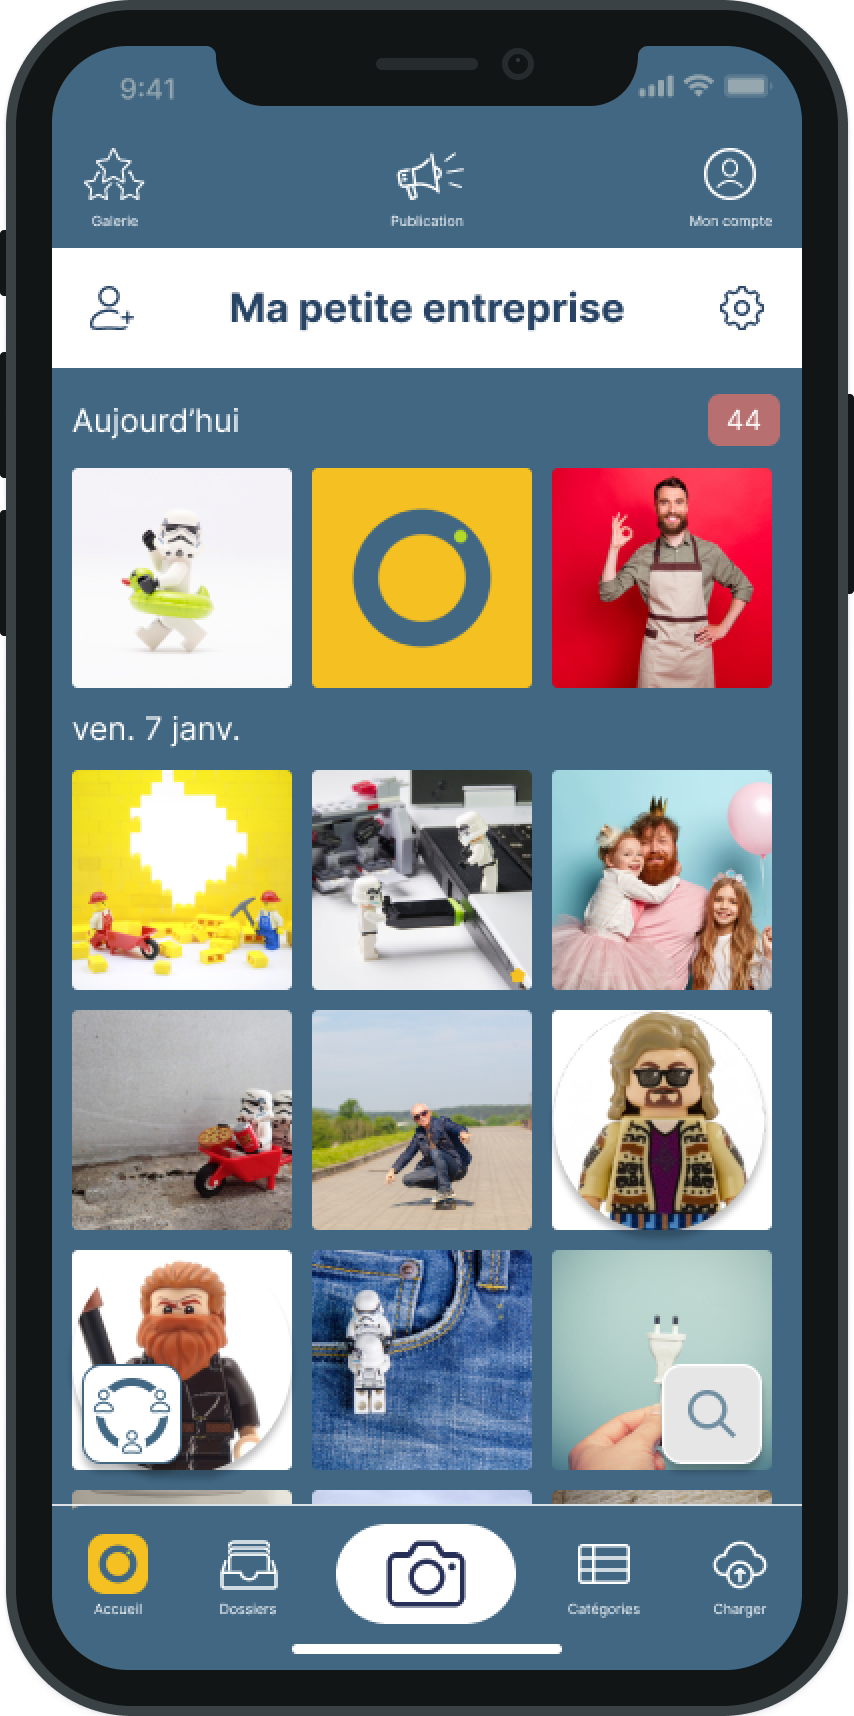  Home screen of the Letmo application, where all the photos added by members of the sharing space are shown.